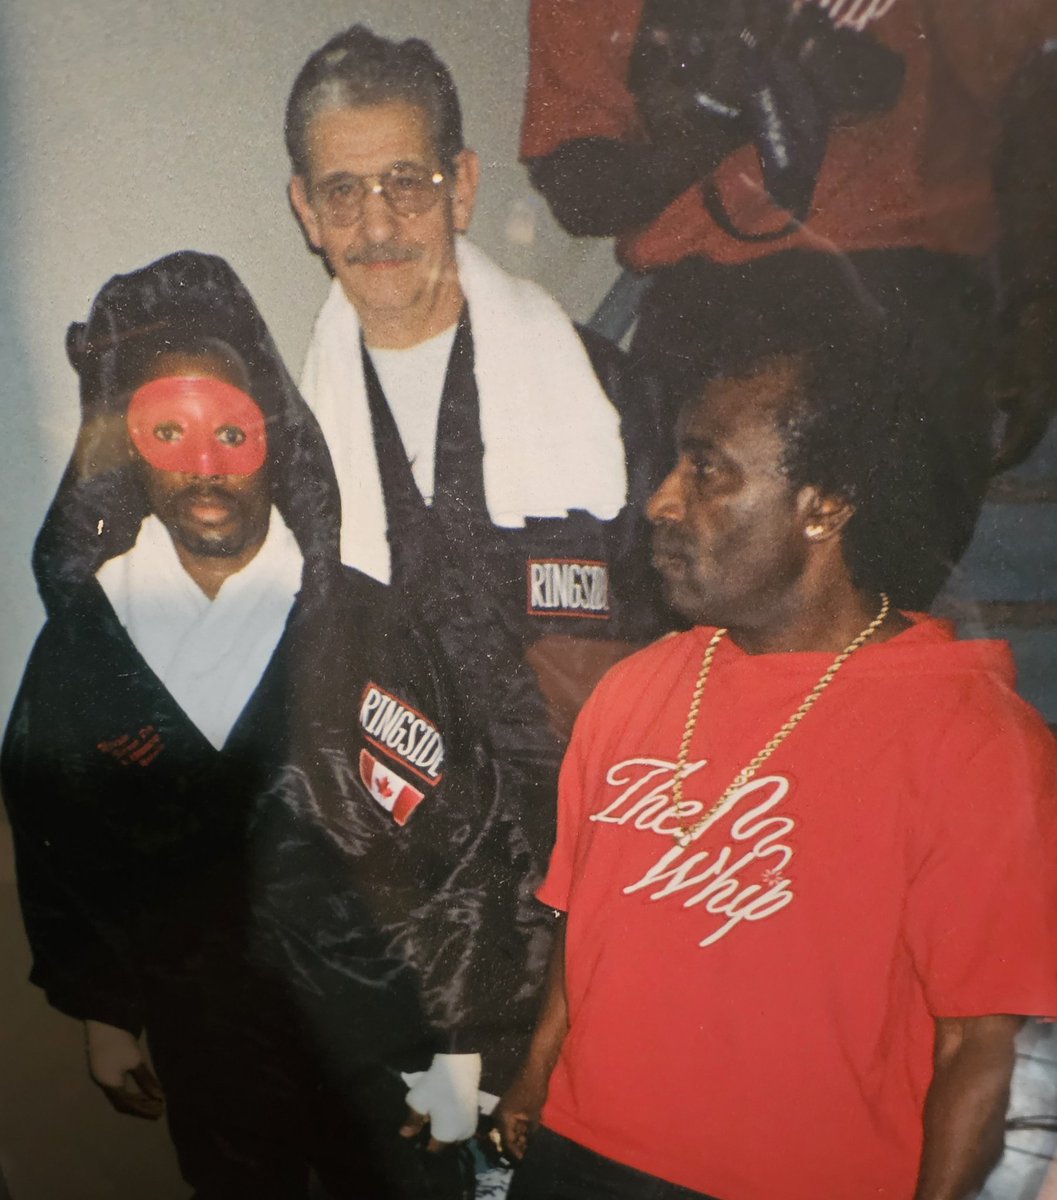 3 years ago today you left us pop's R.I.P 🙏🏿❤️ This was one of your favorite pics with you and Popa ##JoeHajnalSr walking me into championship title fight @royalyorkhotel 1998 #boxing